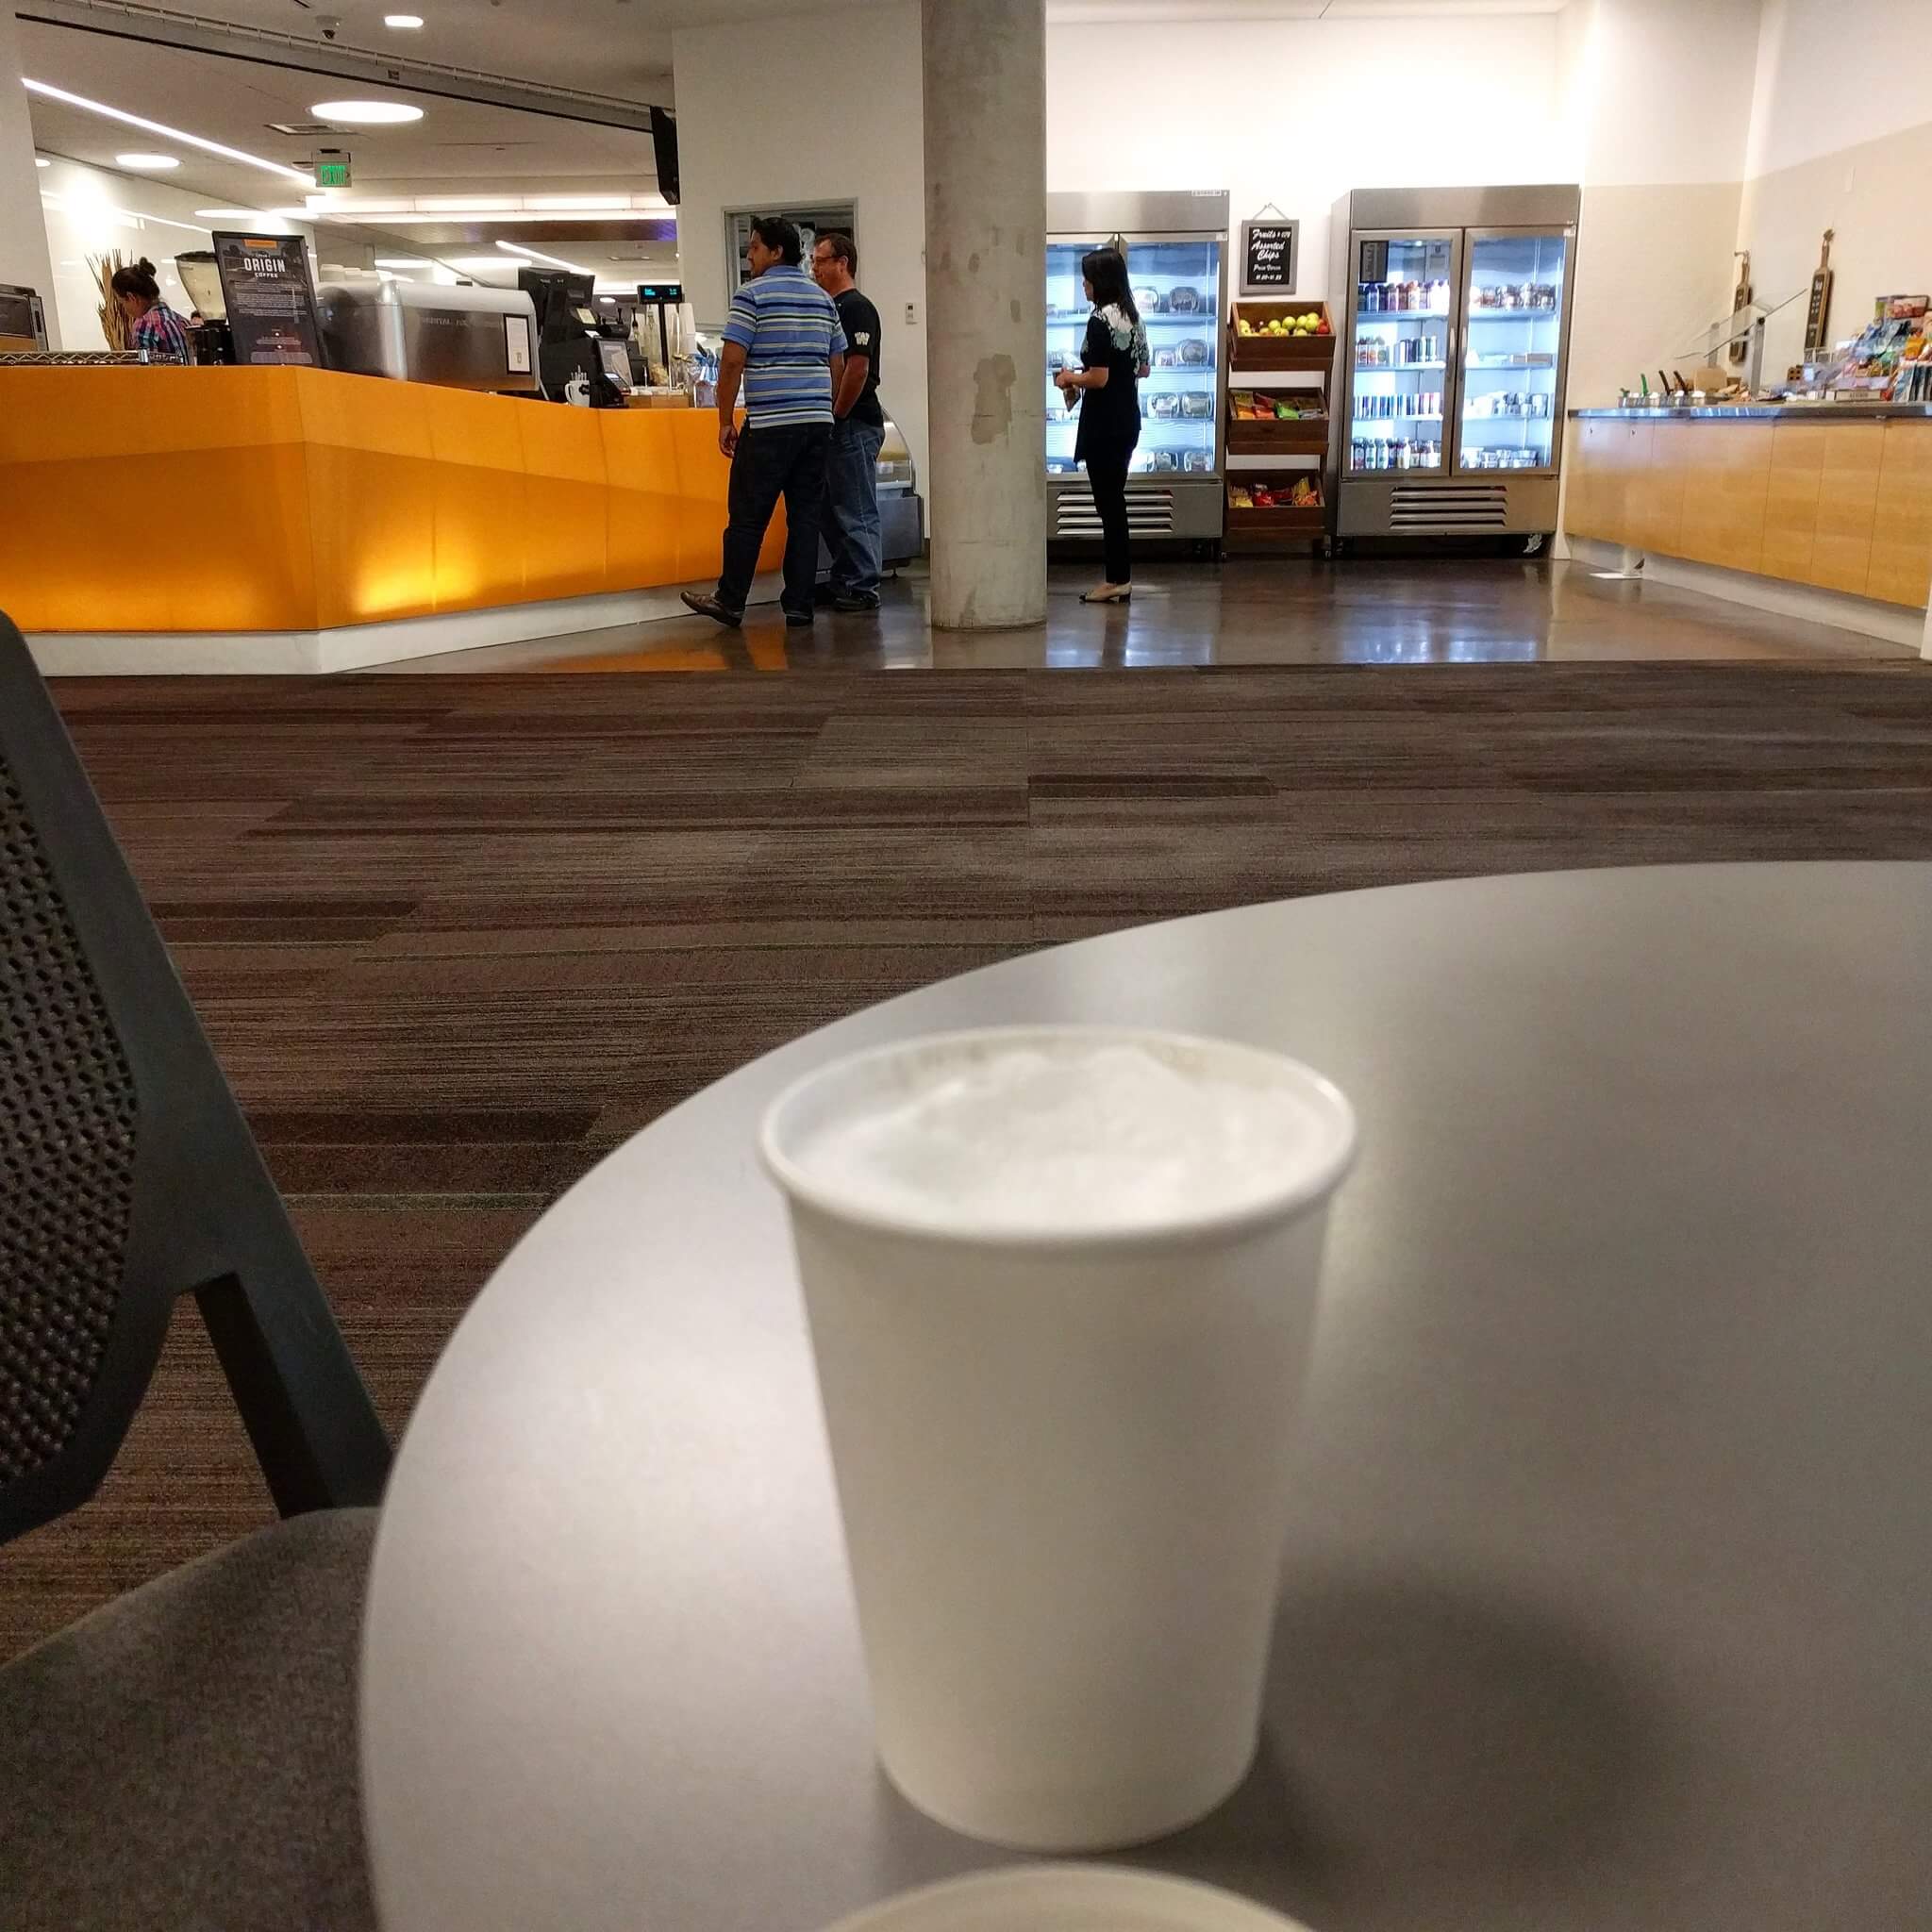 Cappuccino in a paper cup in the foreground, coffee bar and drink cases in the far background, a gulf of carpet between us.